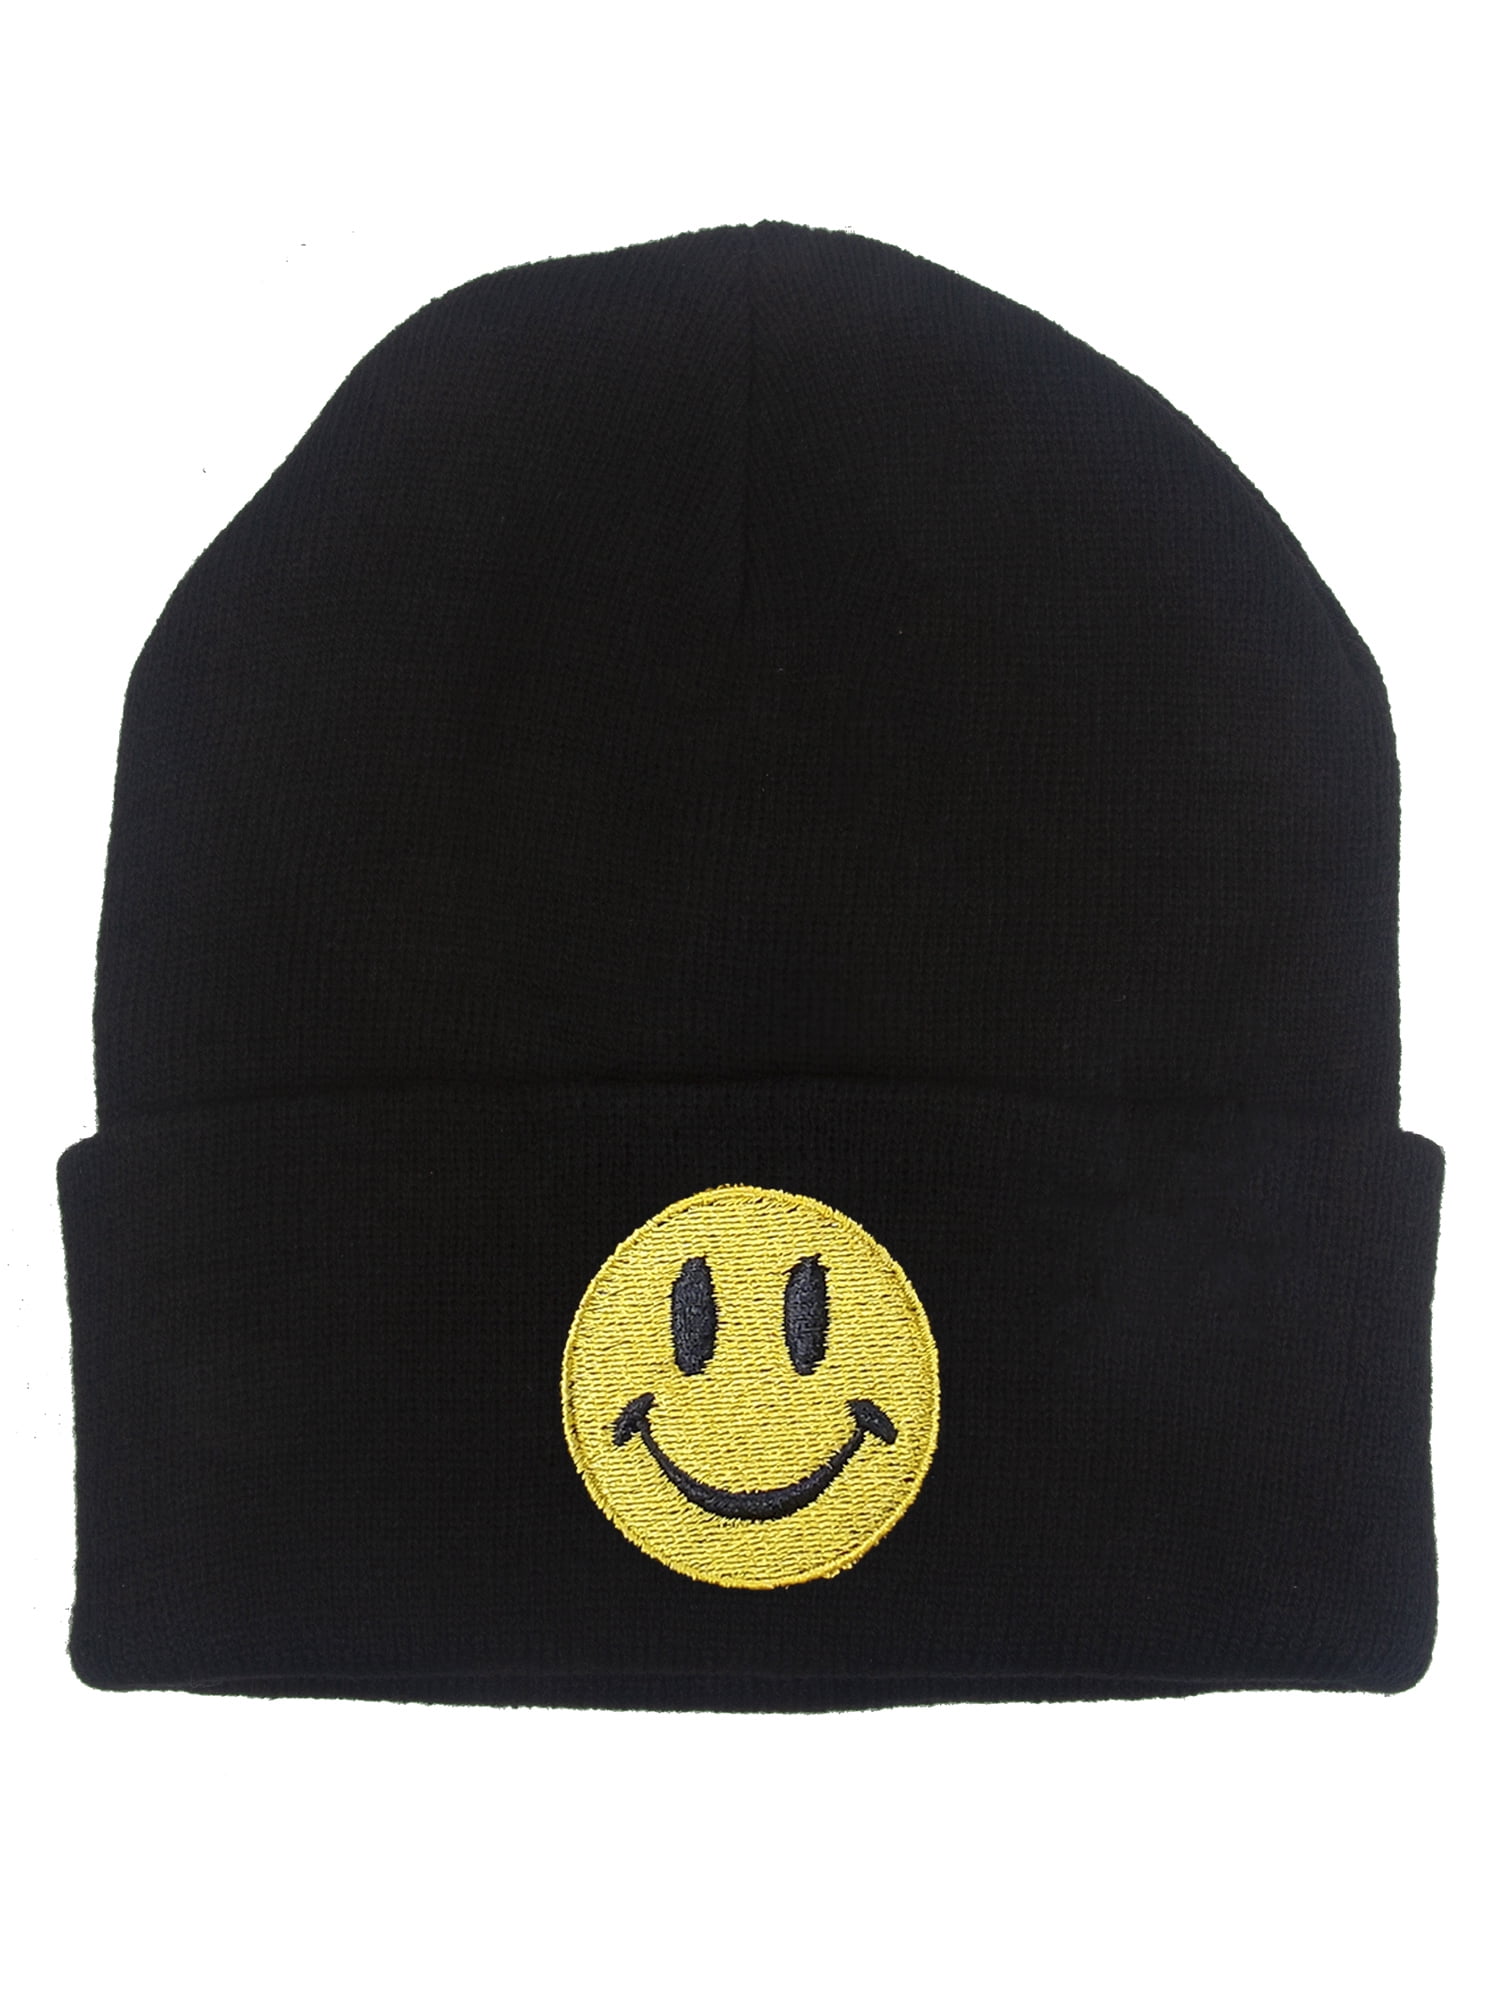 Classic Face Threads - White Smile Gravity - Beanie